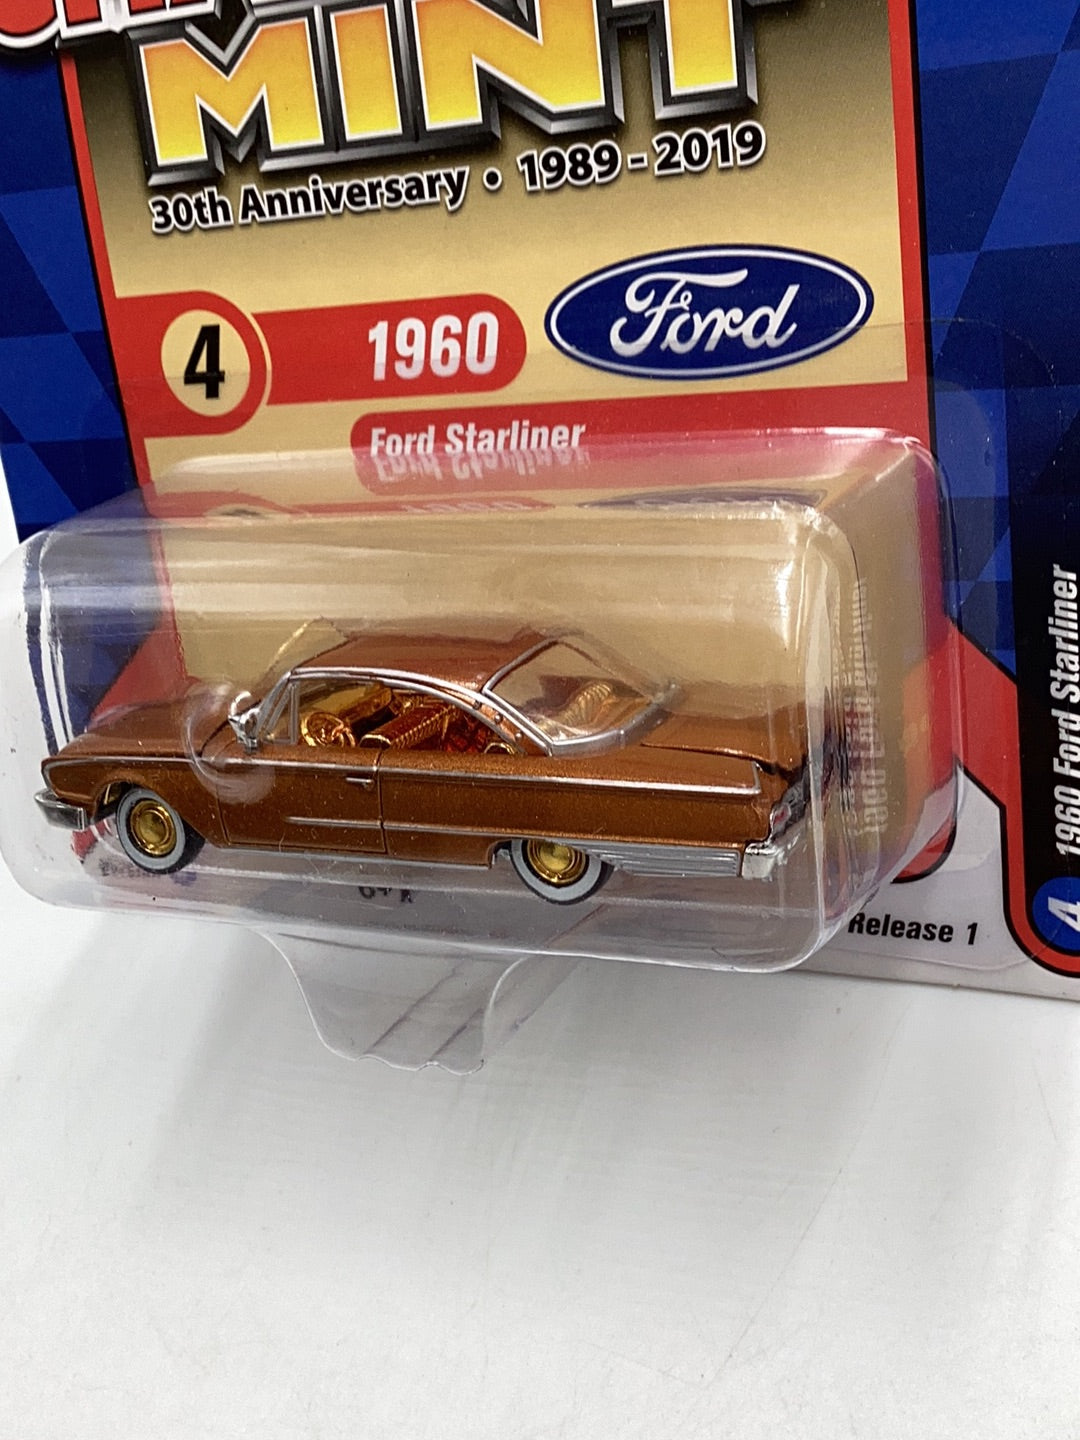 Racing Champions Gold Strike RC Mint 1960 Ford Starliner